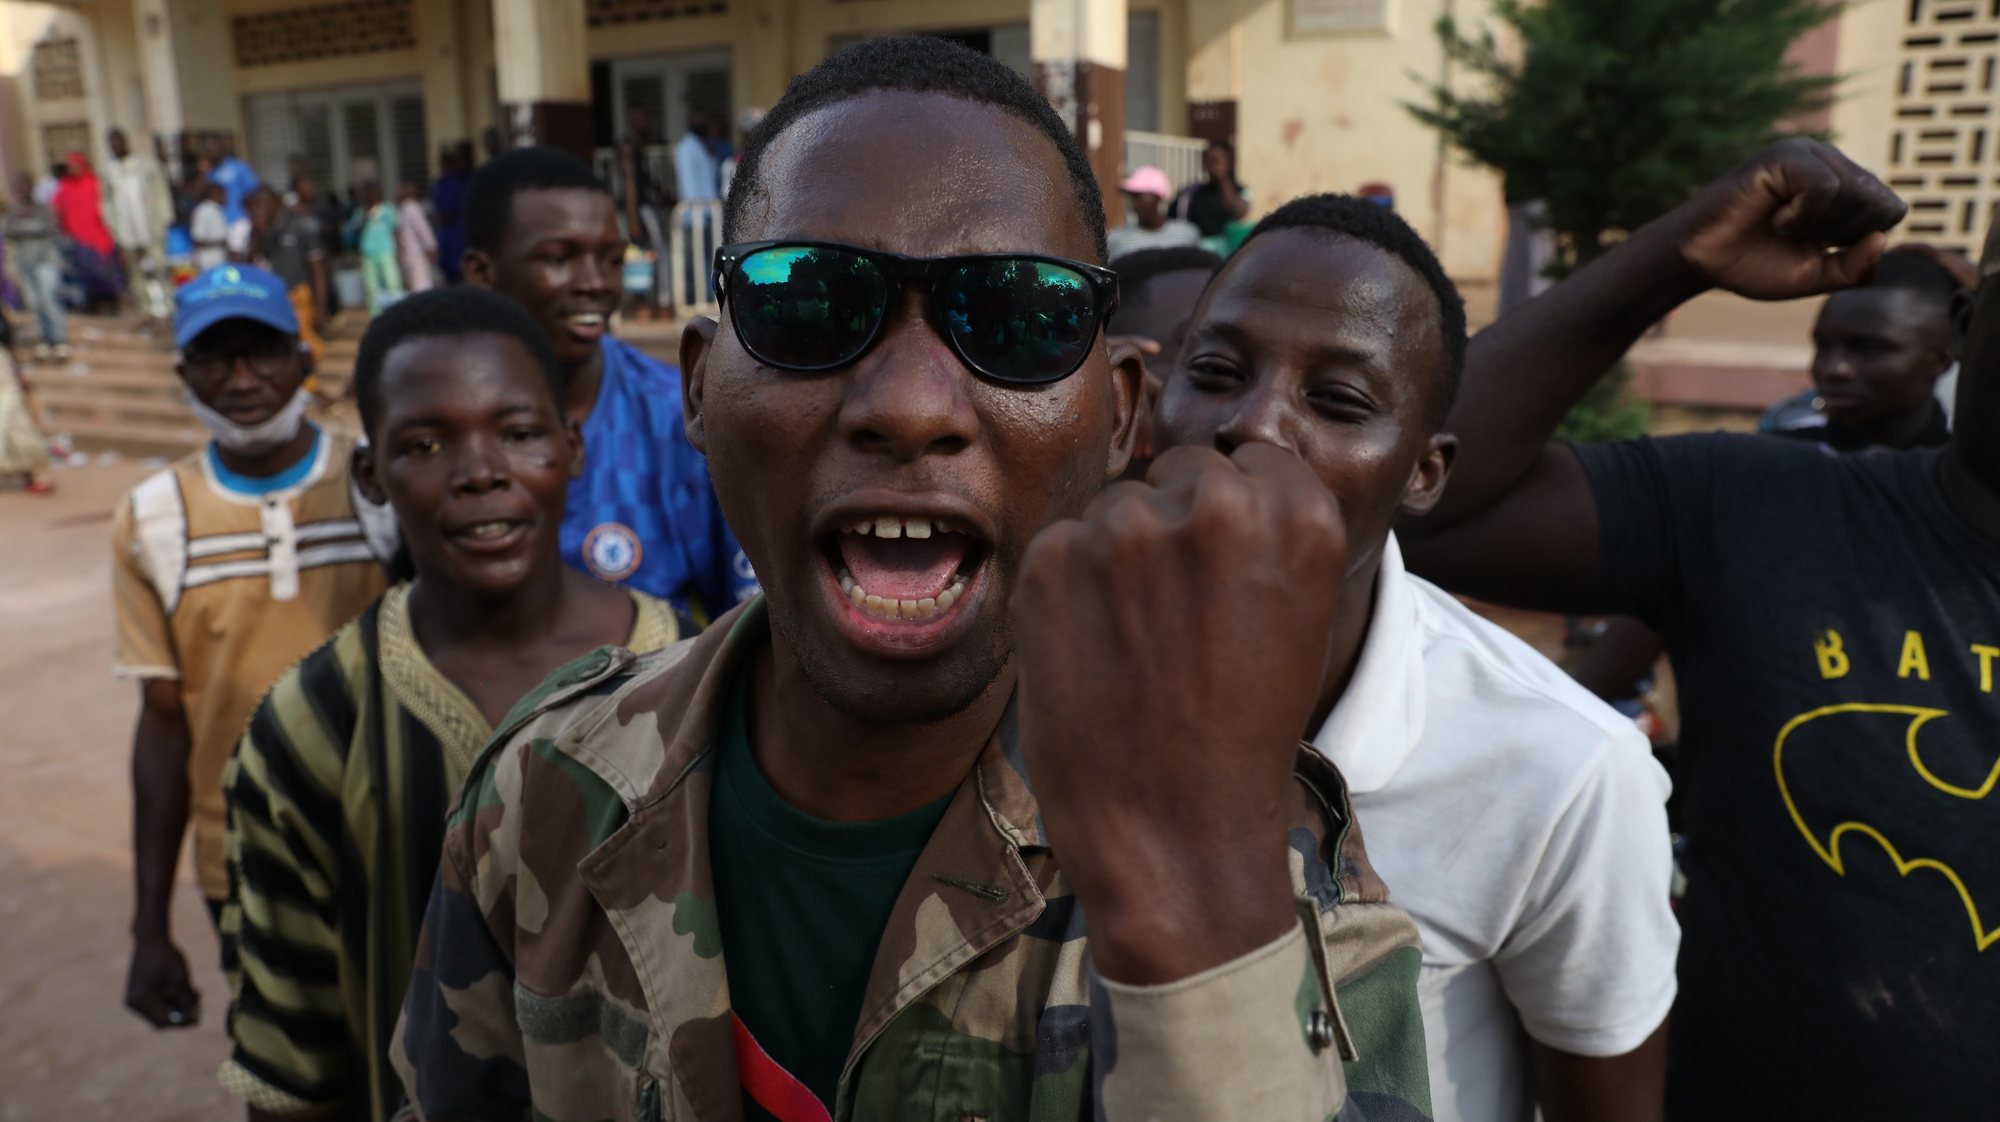 epa10107782 Malians react during a protest against the United Nations presence Mali in the capital Bamako, Mali, 05 August 2022. Pressure is mounting on the United Nations presence in some African countries with protests in Democratic Republic of Congo (DRC) and Mali. The UN&#039;s peacekeeping mission in Mali admits there were &#039;dysfunctions&#039; that preceded a confrontation with Malian authorities initiated by the arrival of Ivorian troops at Bamako airport in July.  EPA/HADAMA DIAKITE